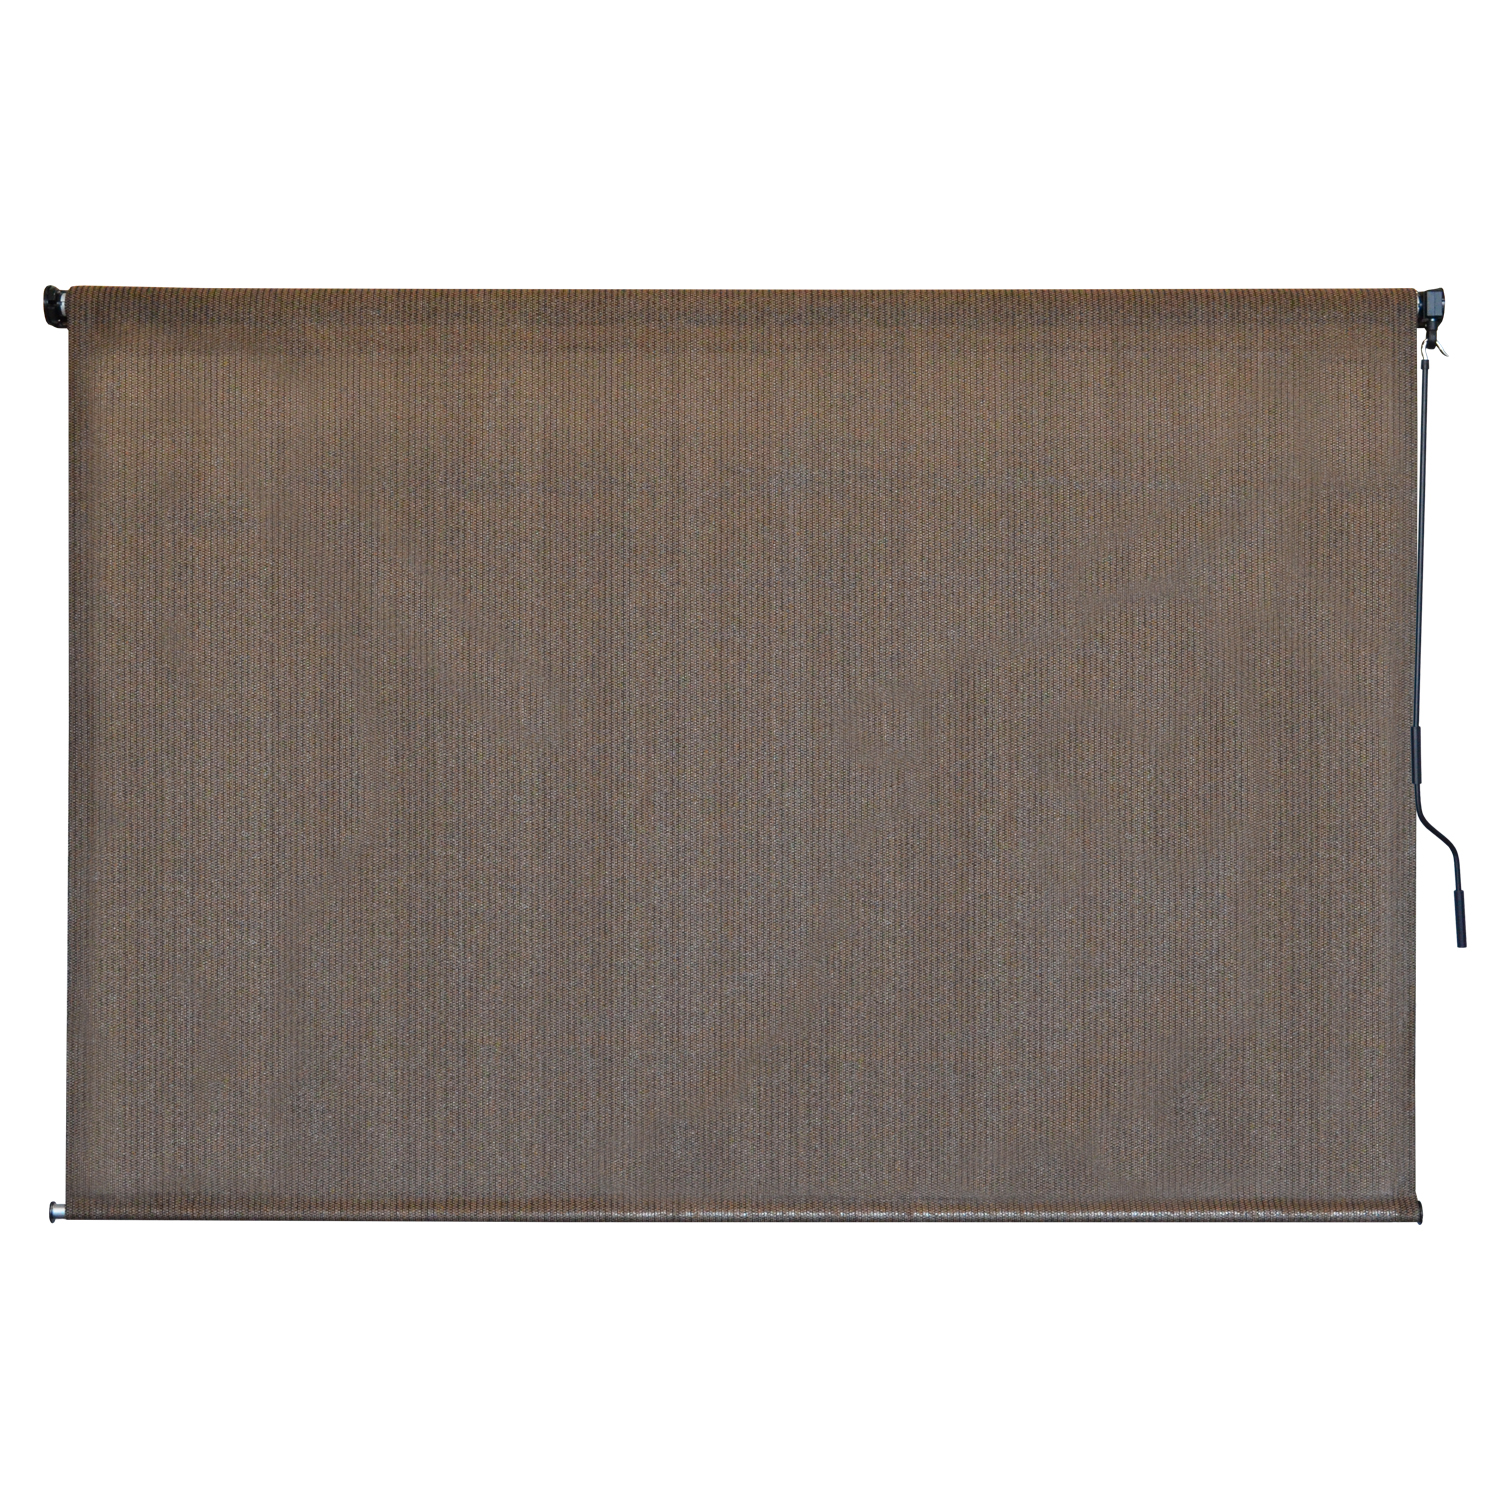 P7720 84x 72 In. Outdoor Cordless Sun Shade, Cabo Sand